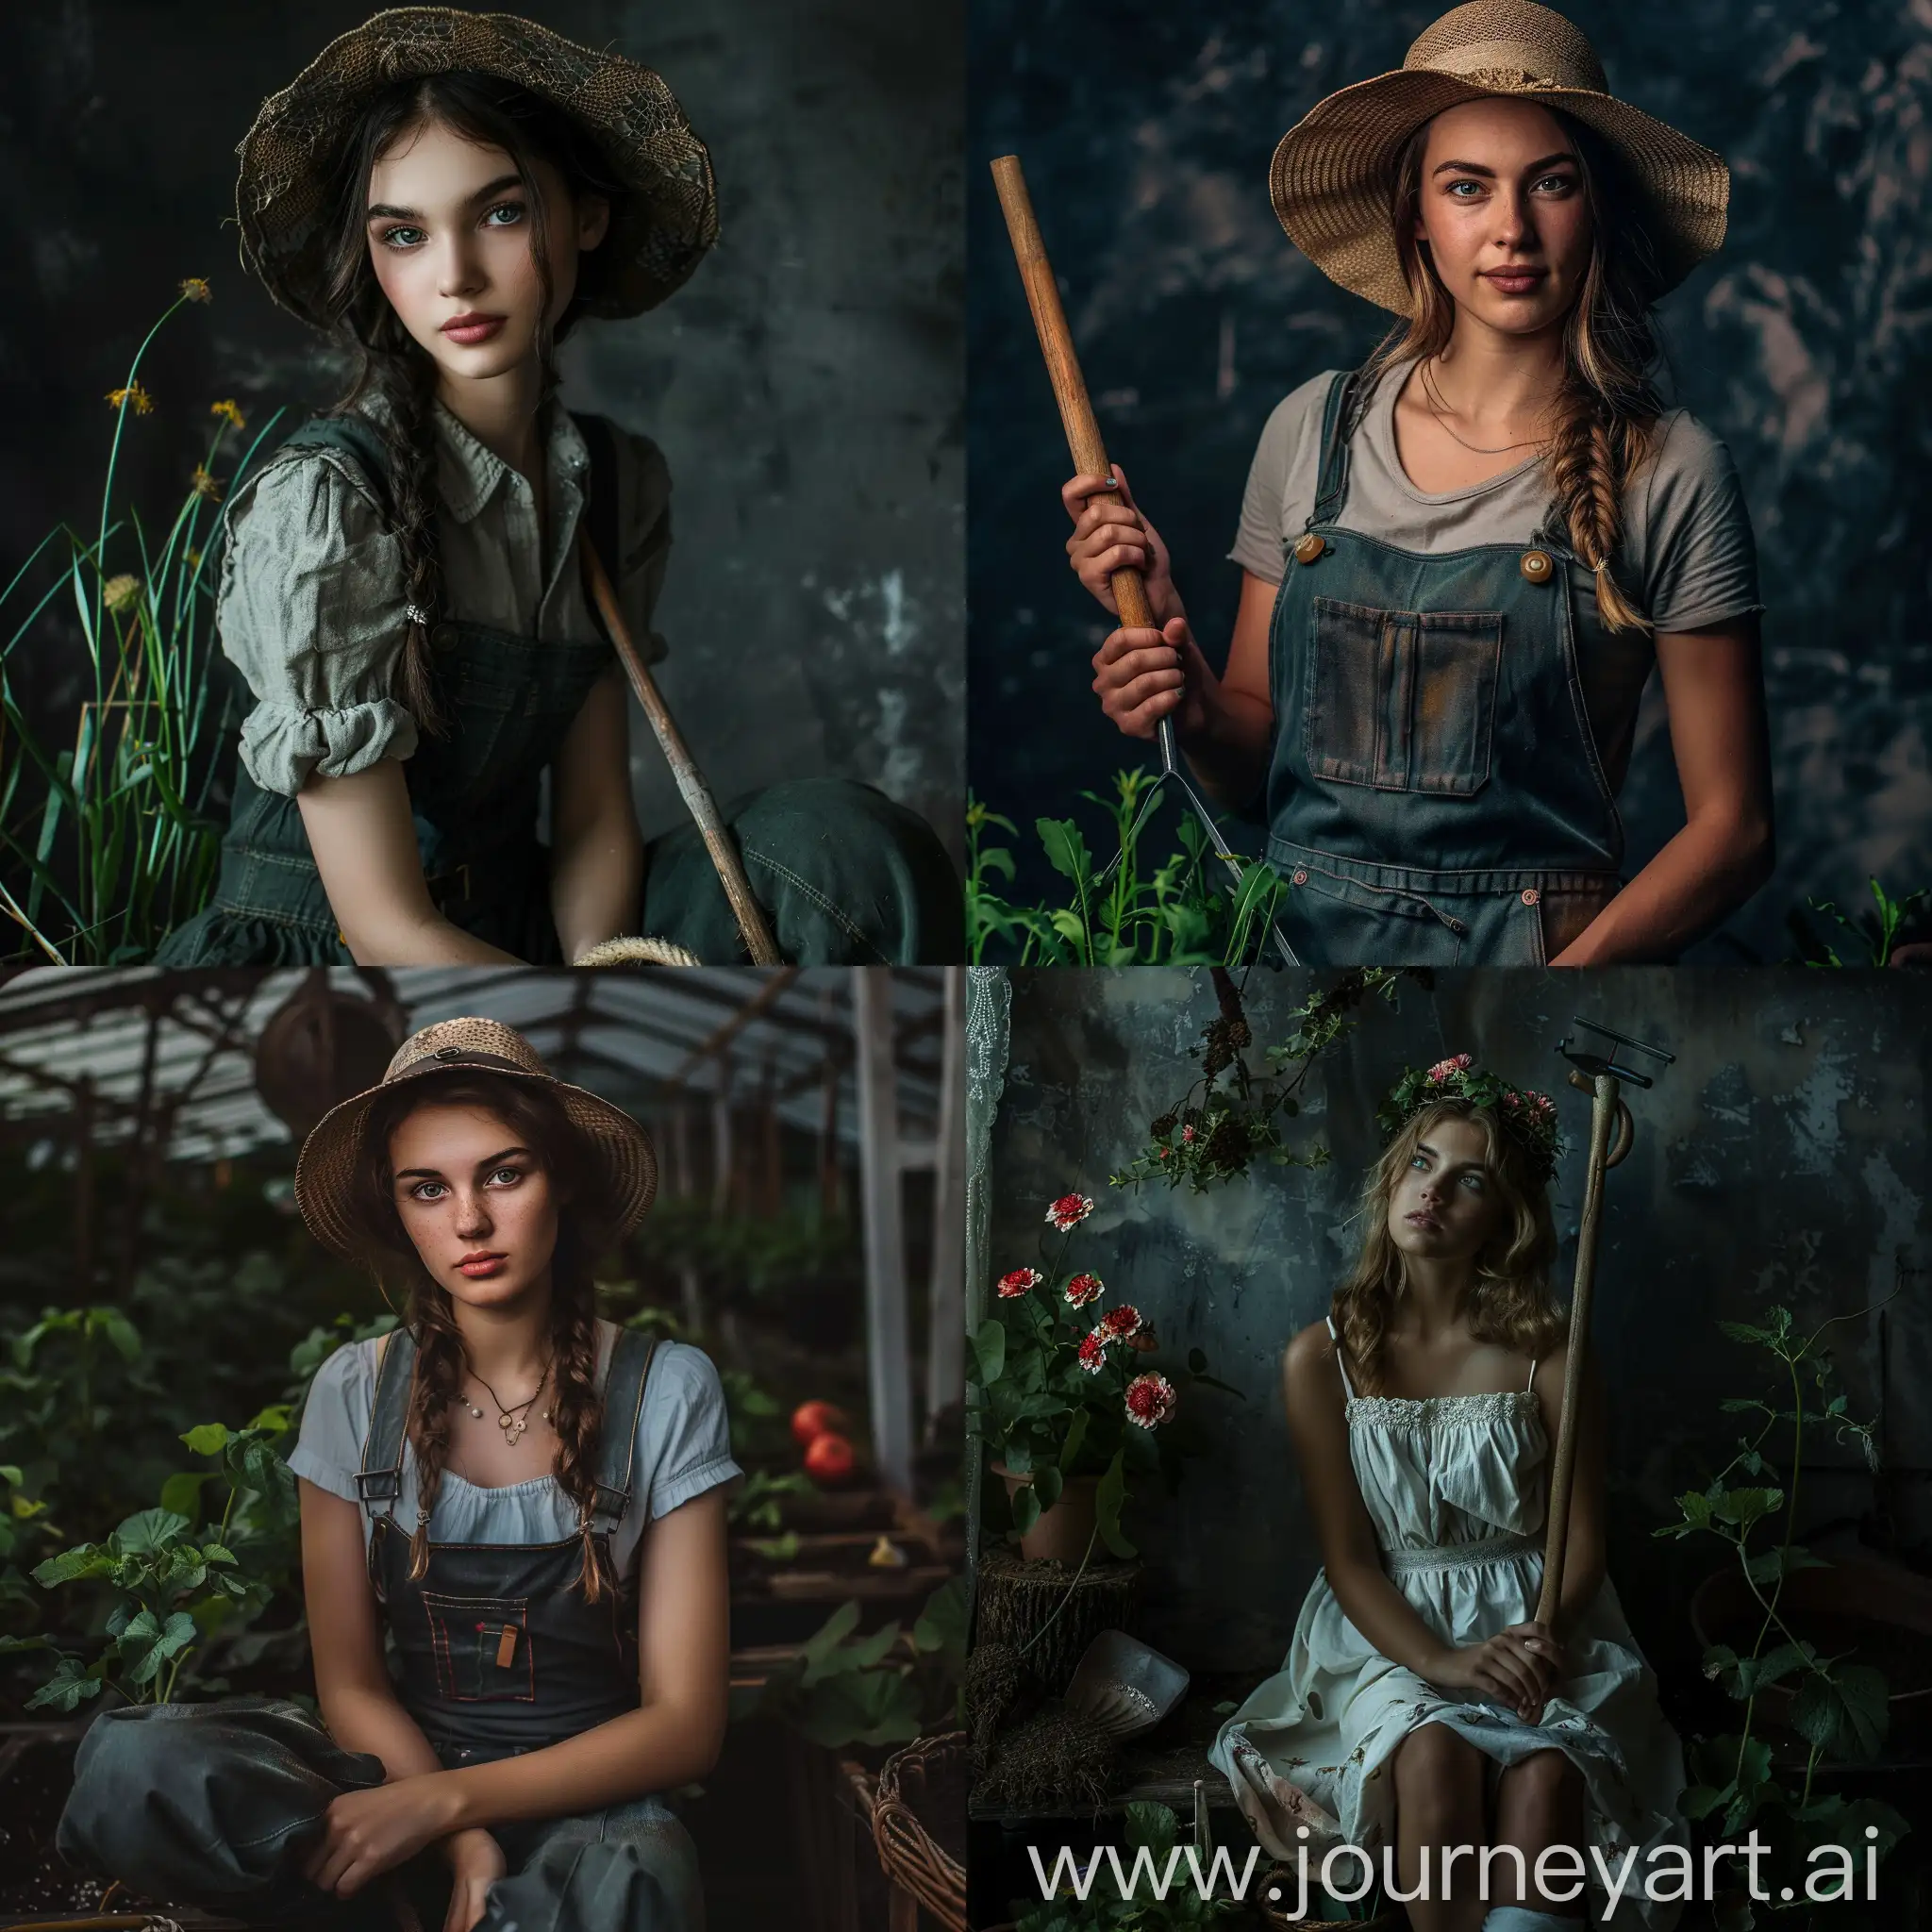 Young-Girl-Gardening-in-the-Moonlight